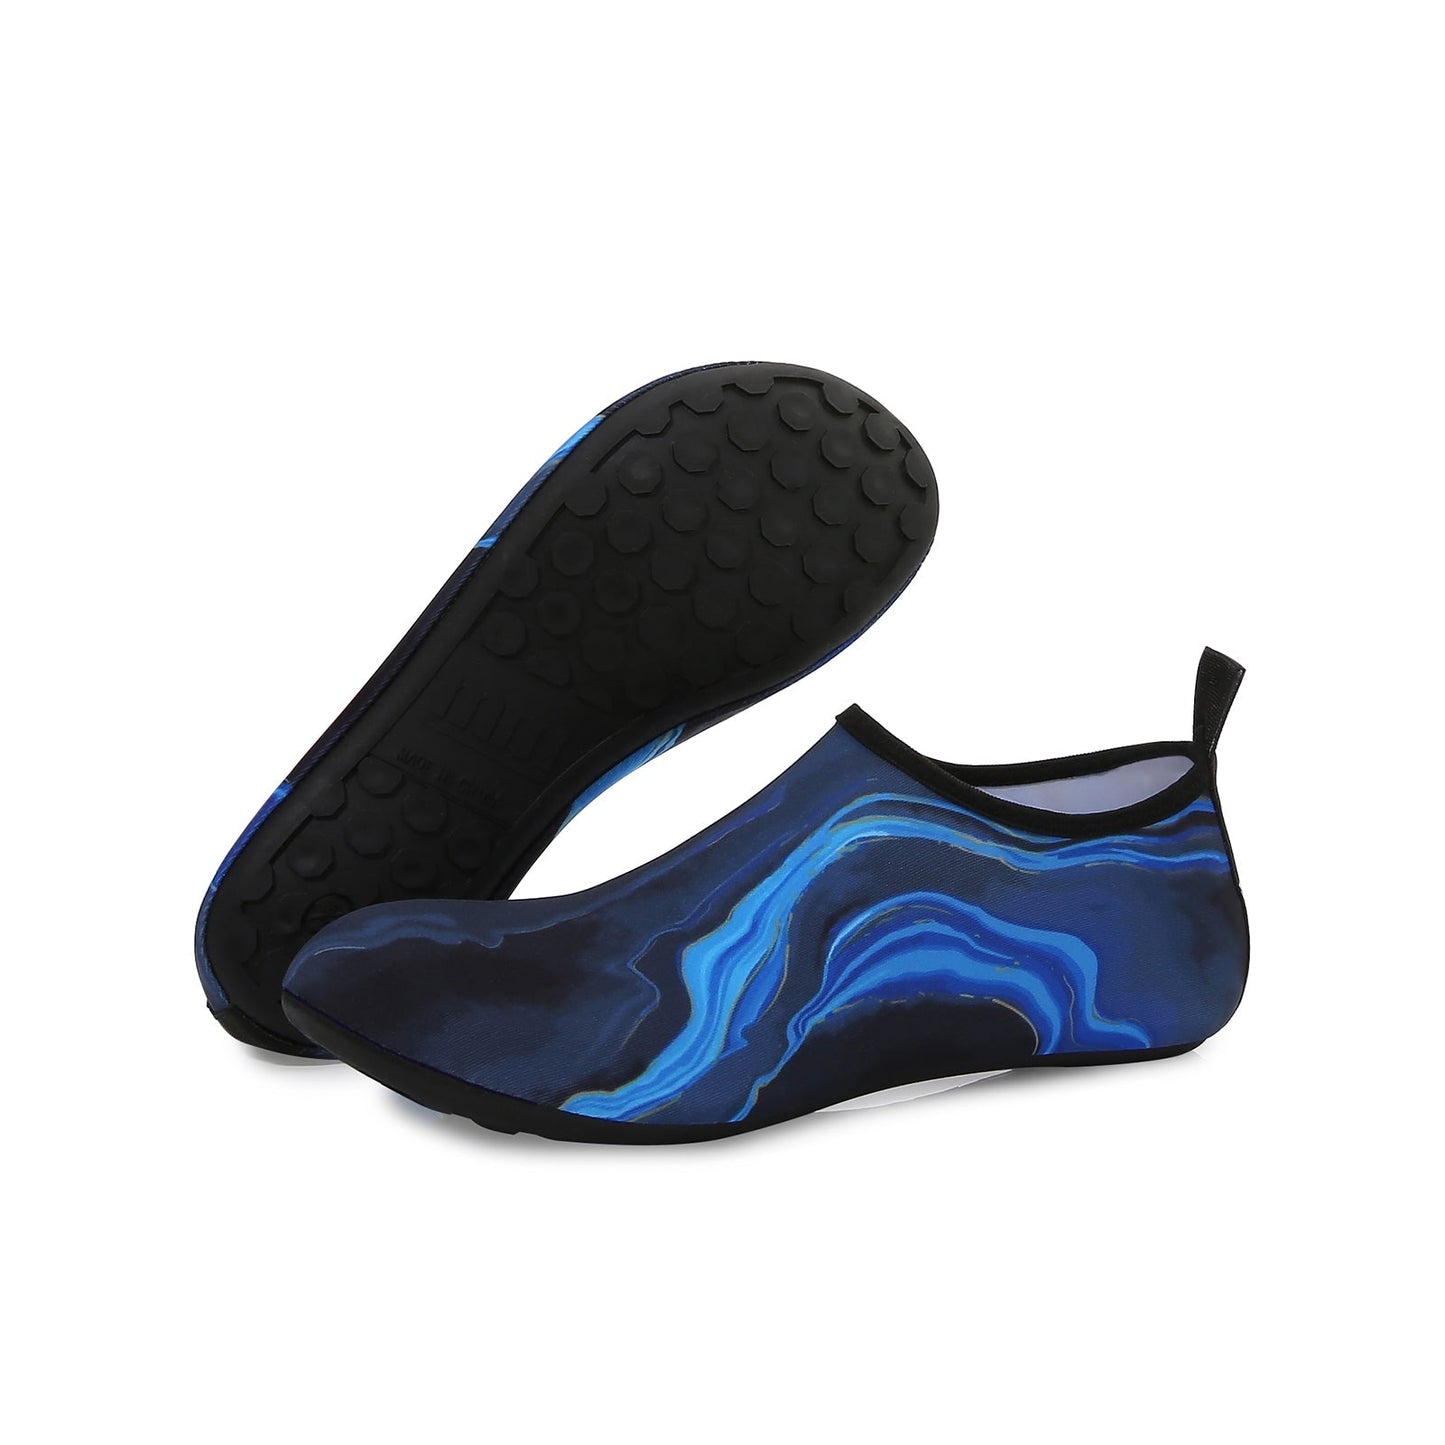 Men and Women a Slip On Barefoot Quick-Dry Beach Aqua Yoga Water Shoes (Water Smudge/Blue)